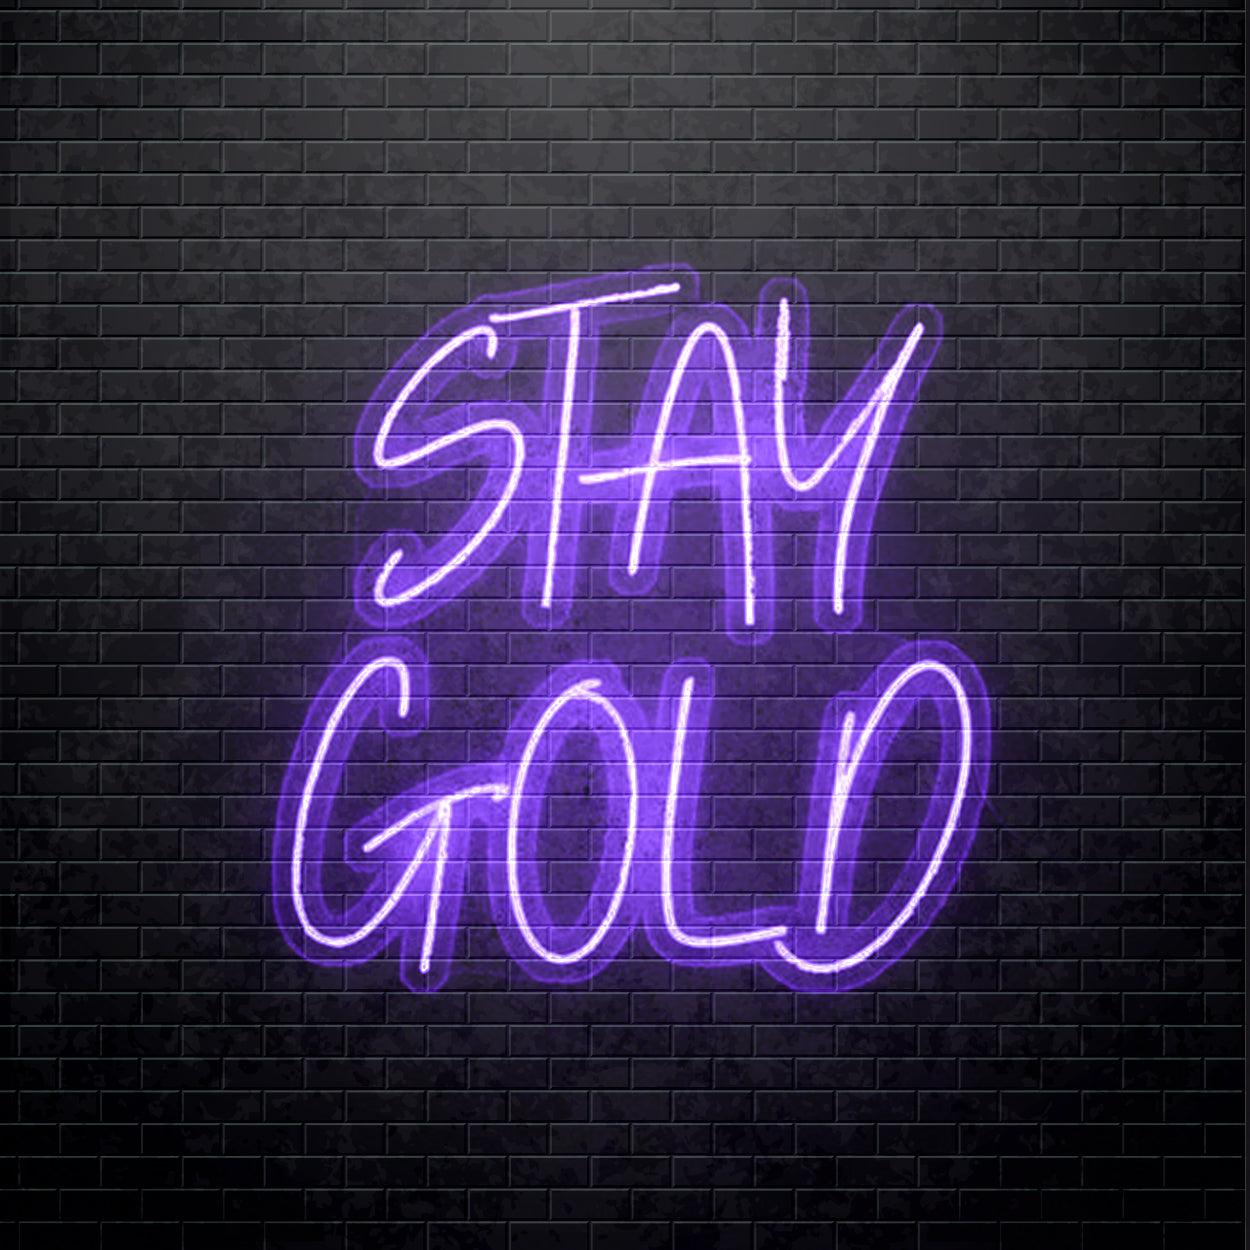 LED Neon sign - Stay Gold